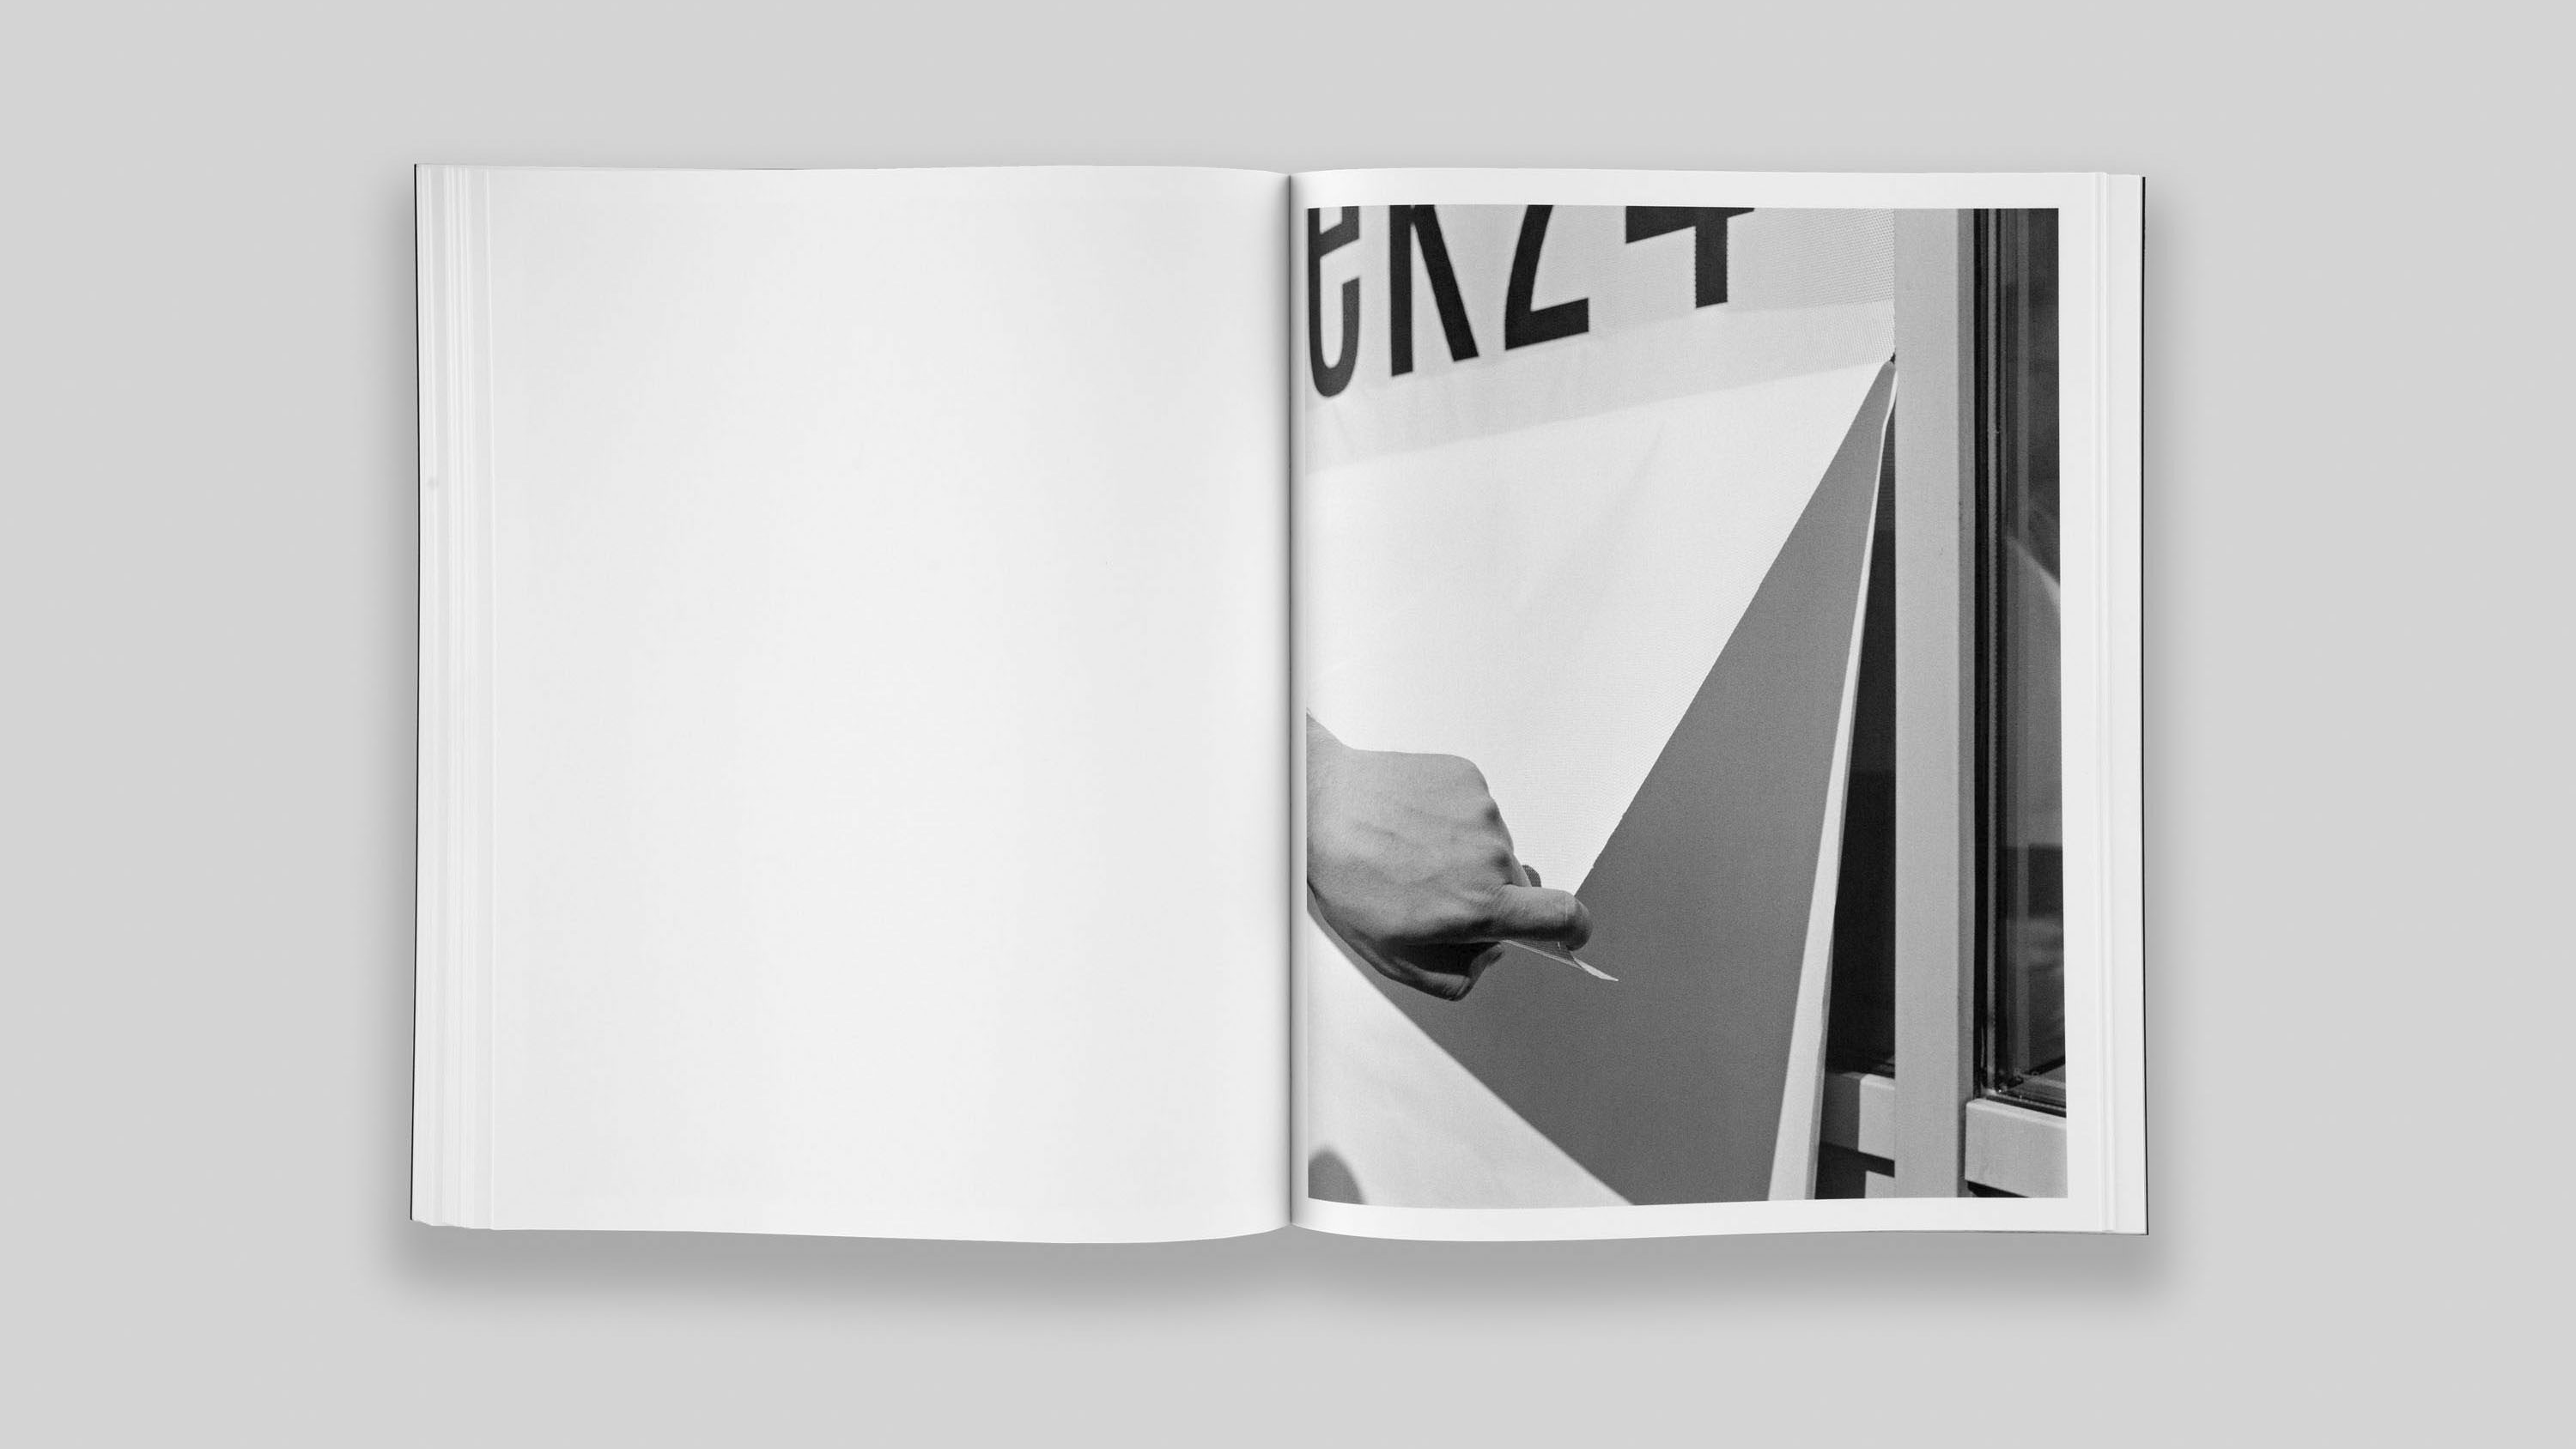 bertrand cavalier concrete doesn't burn book published by fw:books 2020